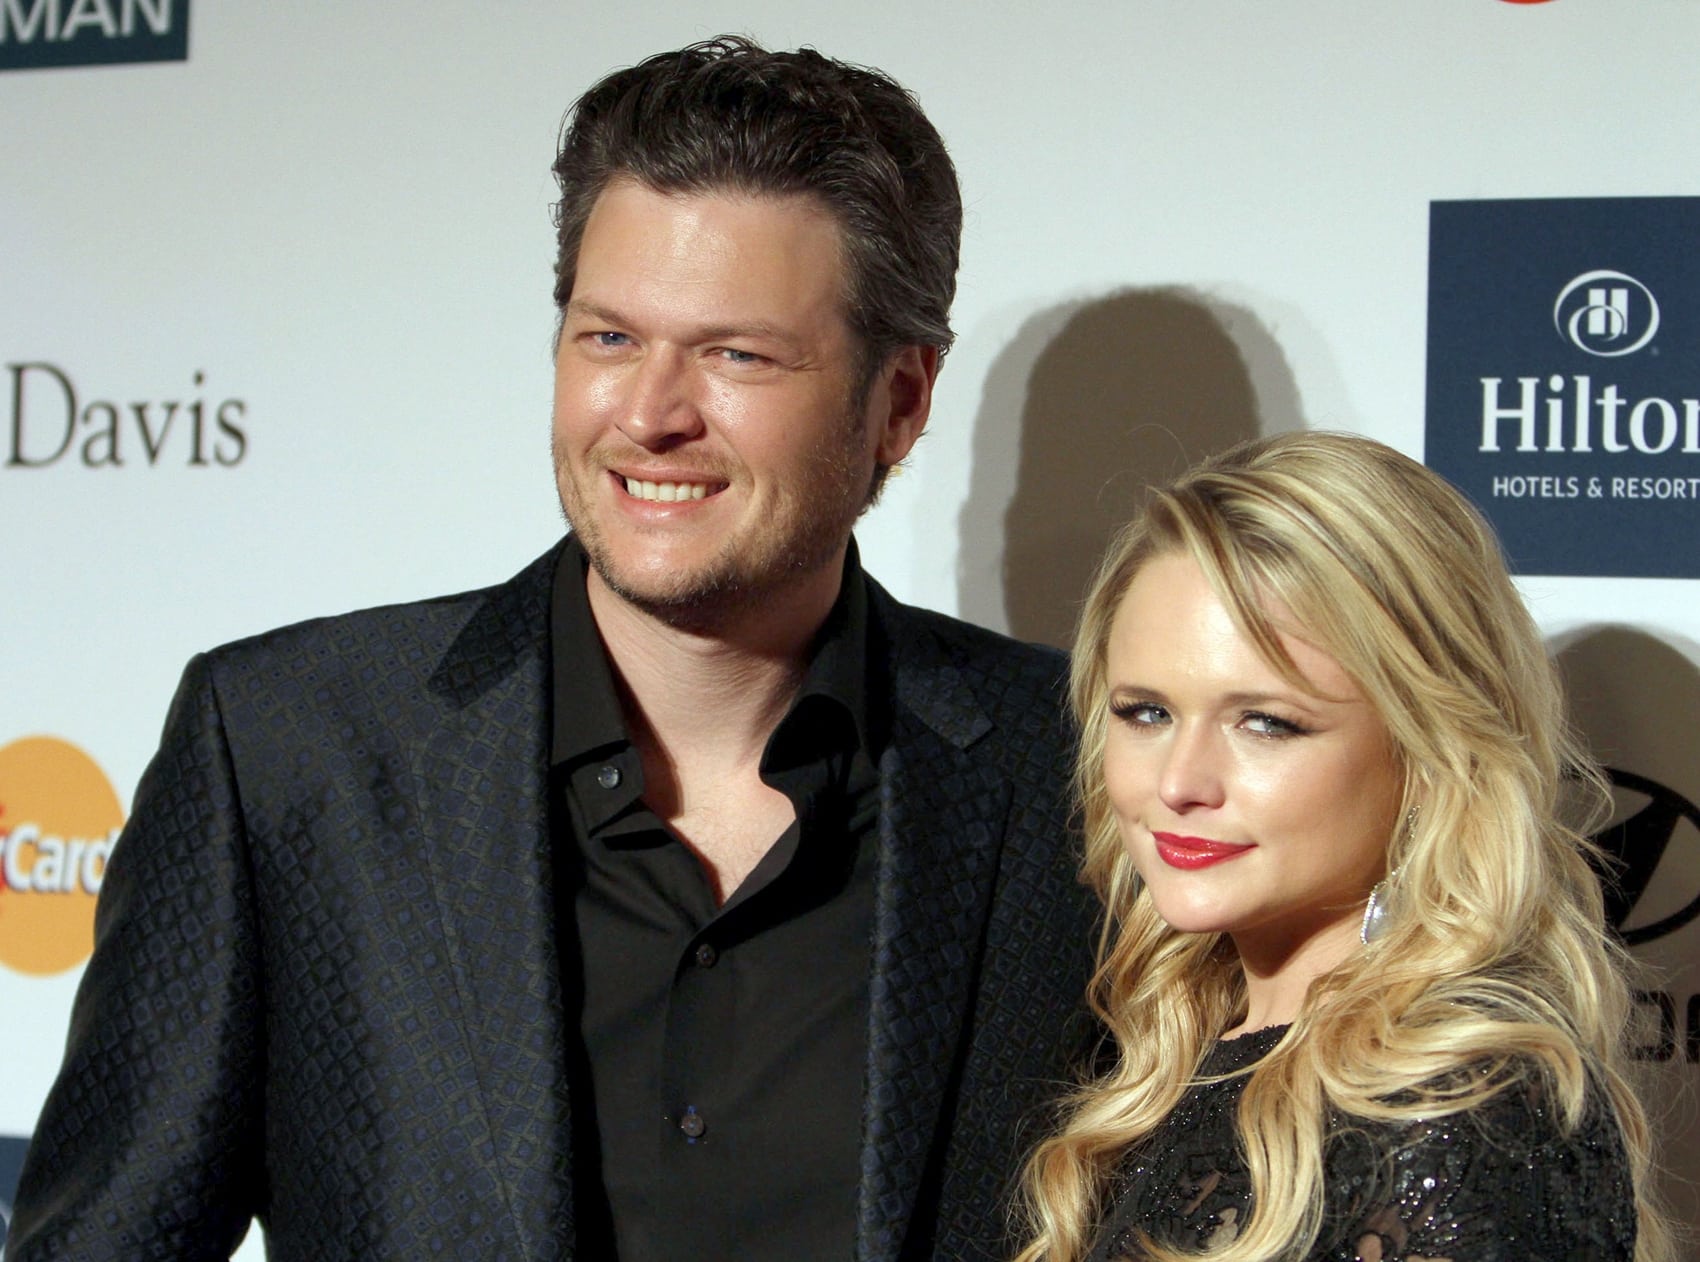 Blake Shelton and Miranda Lambert co-wrote "Over You," a country ballad about a personal experience Shelton had as a teenager when his older brother Richie was killed in a car accident